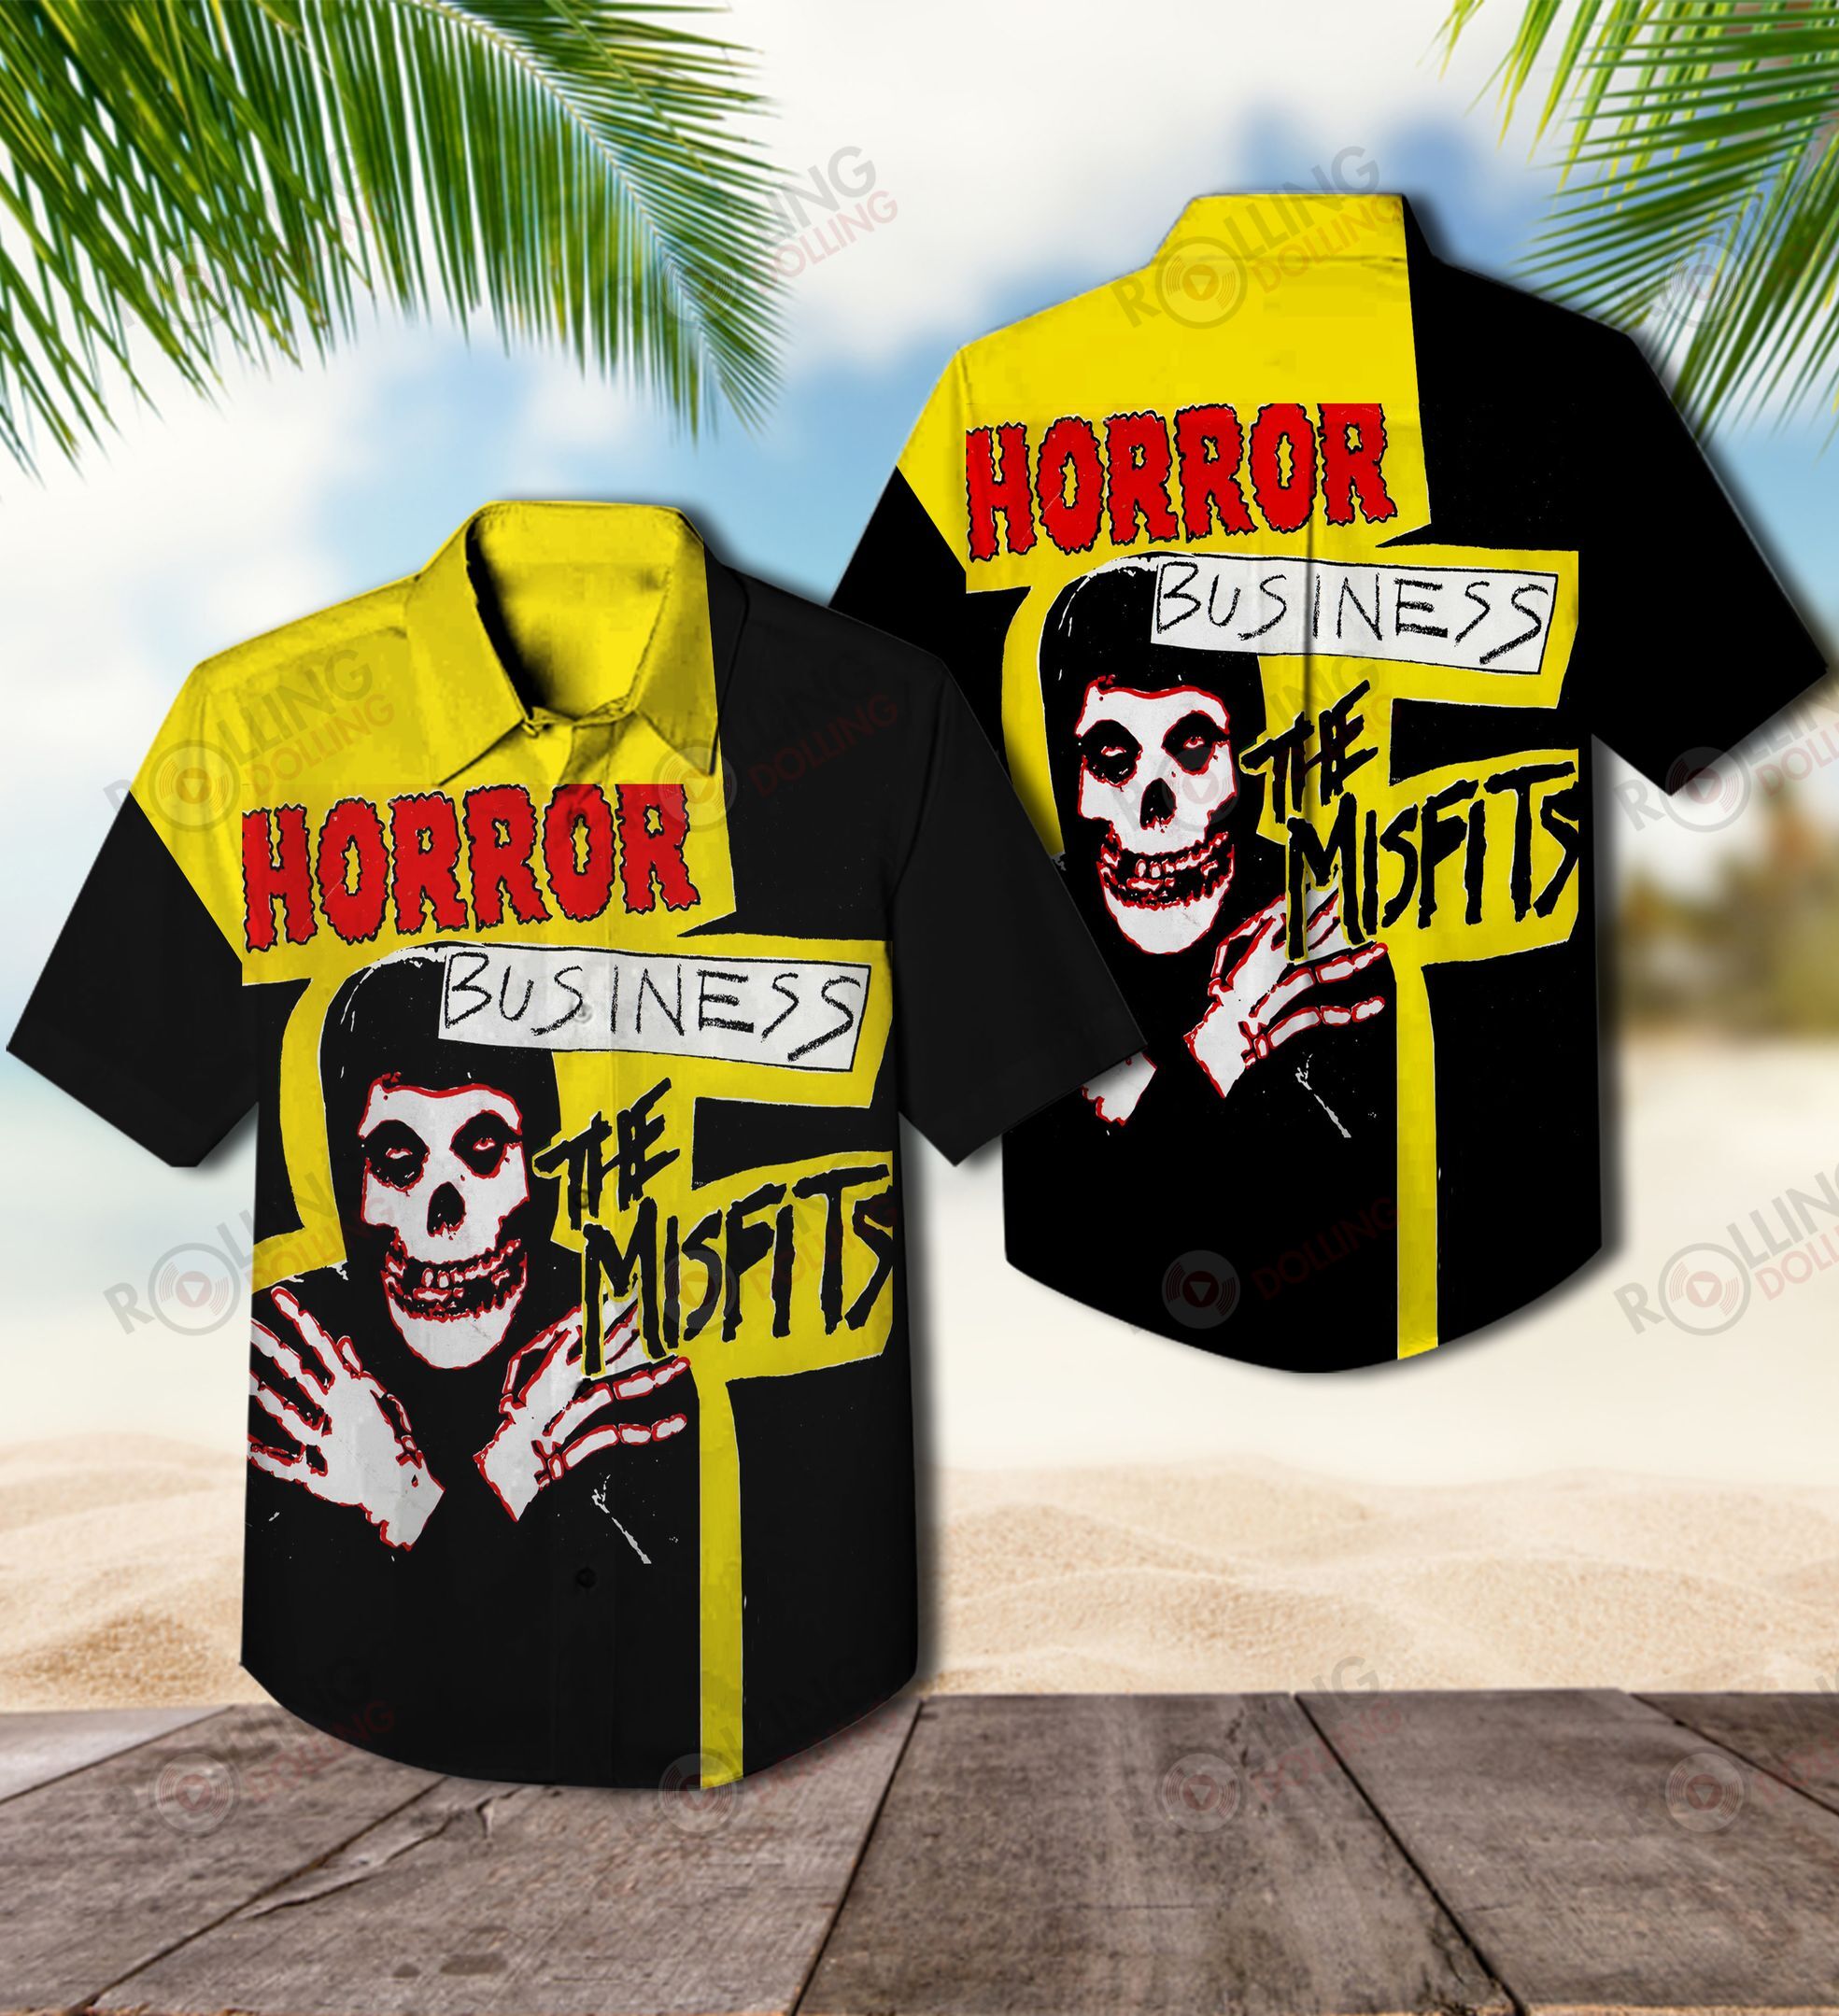 Now you can show off your love of all things band with this Hawaiian Shirt 71